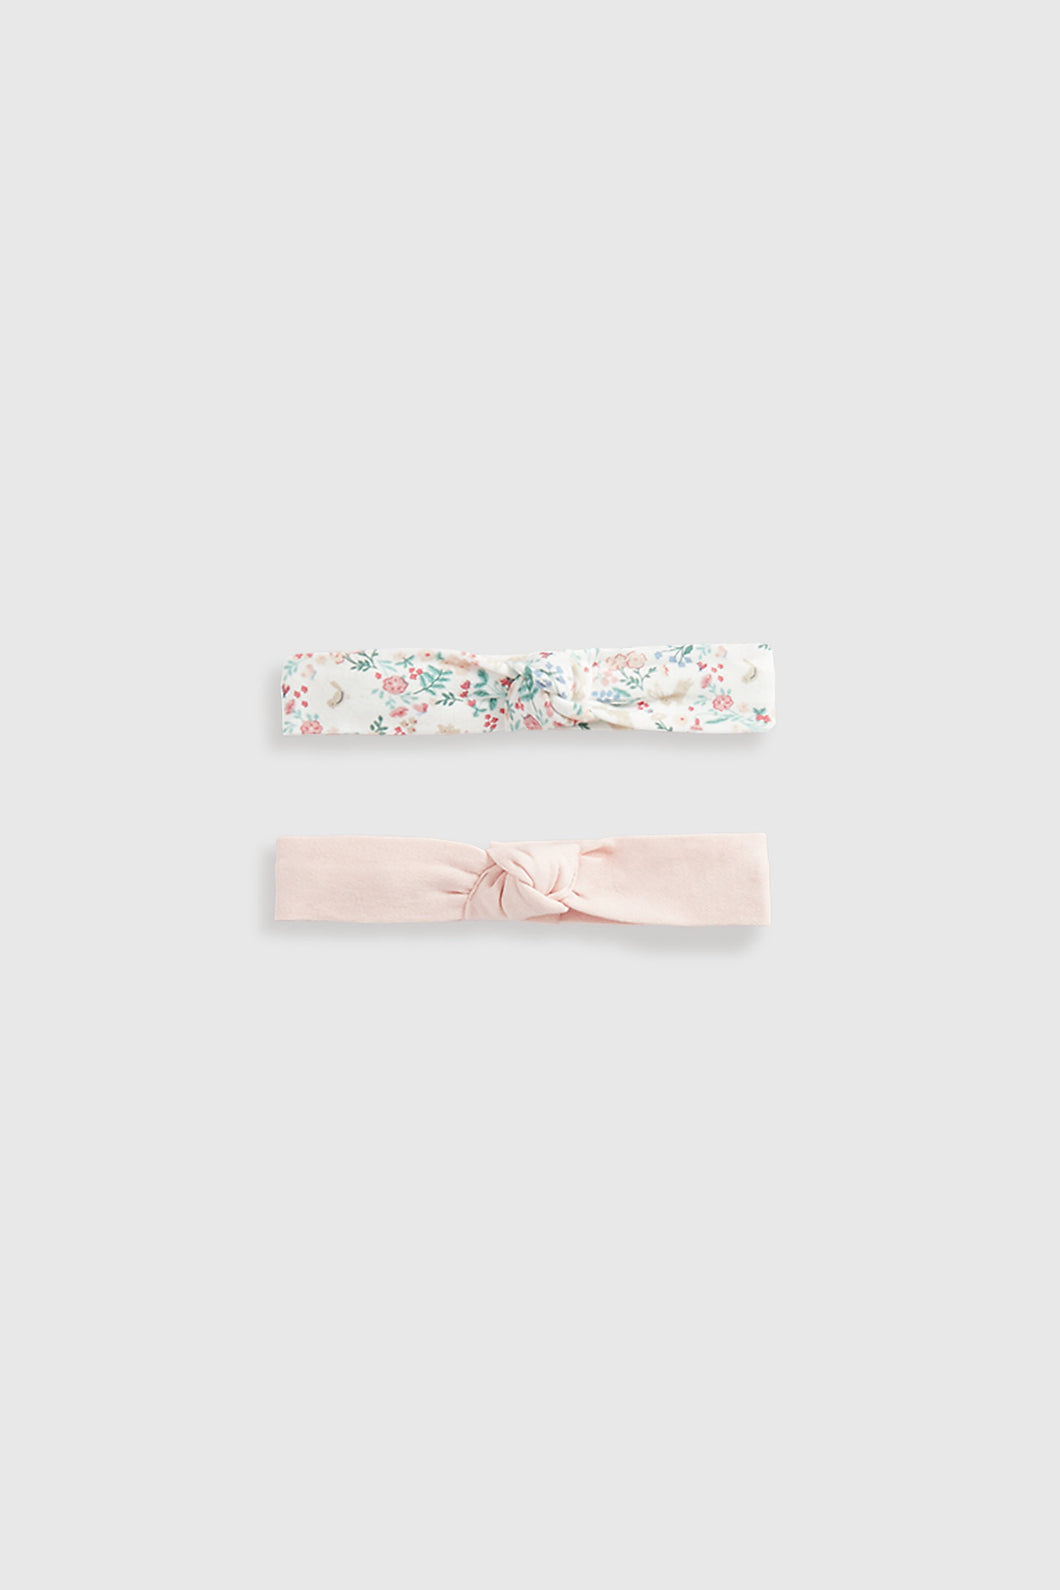 Mothercare Pink and Floral Headbands - 2 Pack